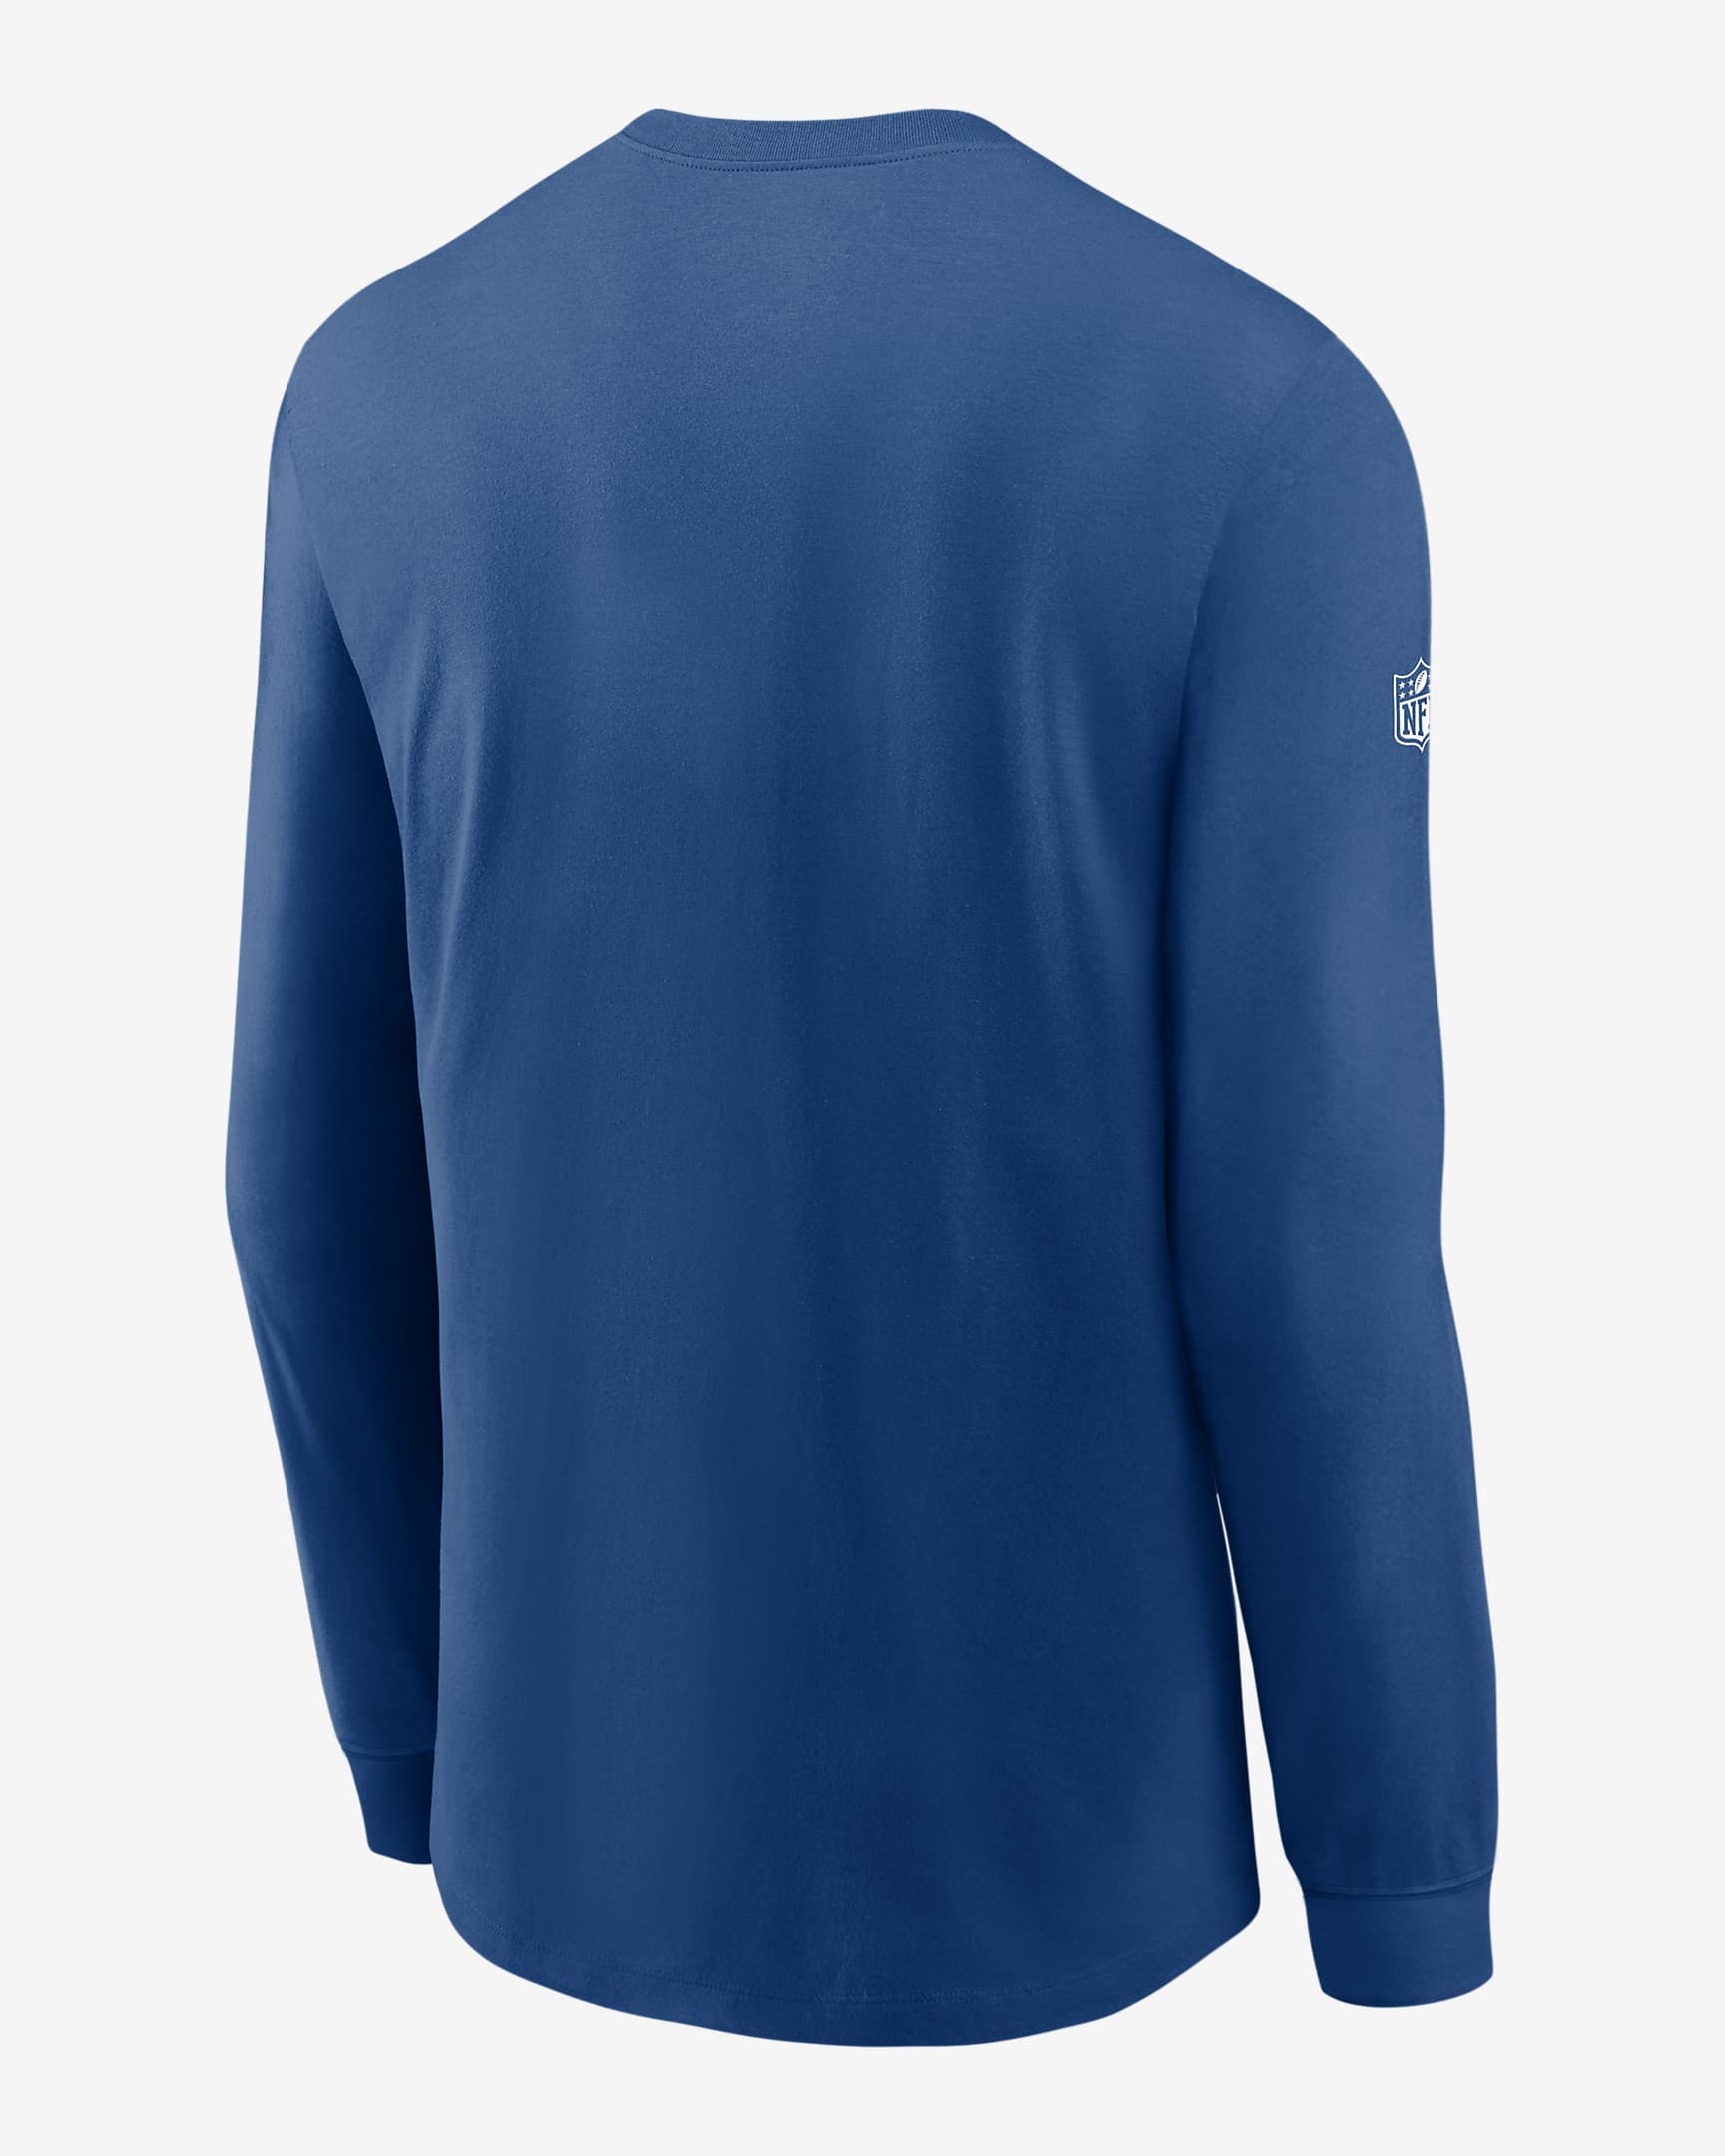 Nike Dri-FIT Sideline Team (NFL Indianapolis Colts) Men's Long-Sleeve T ...